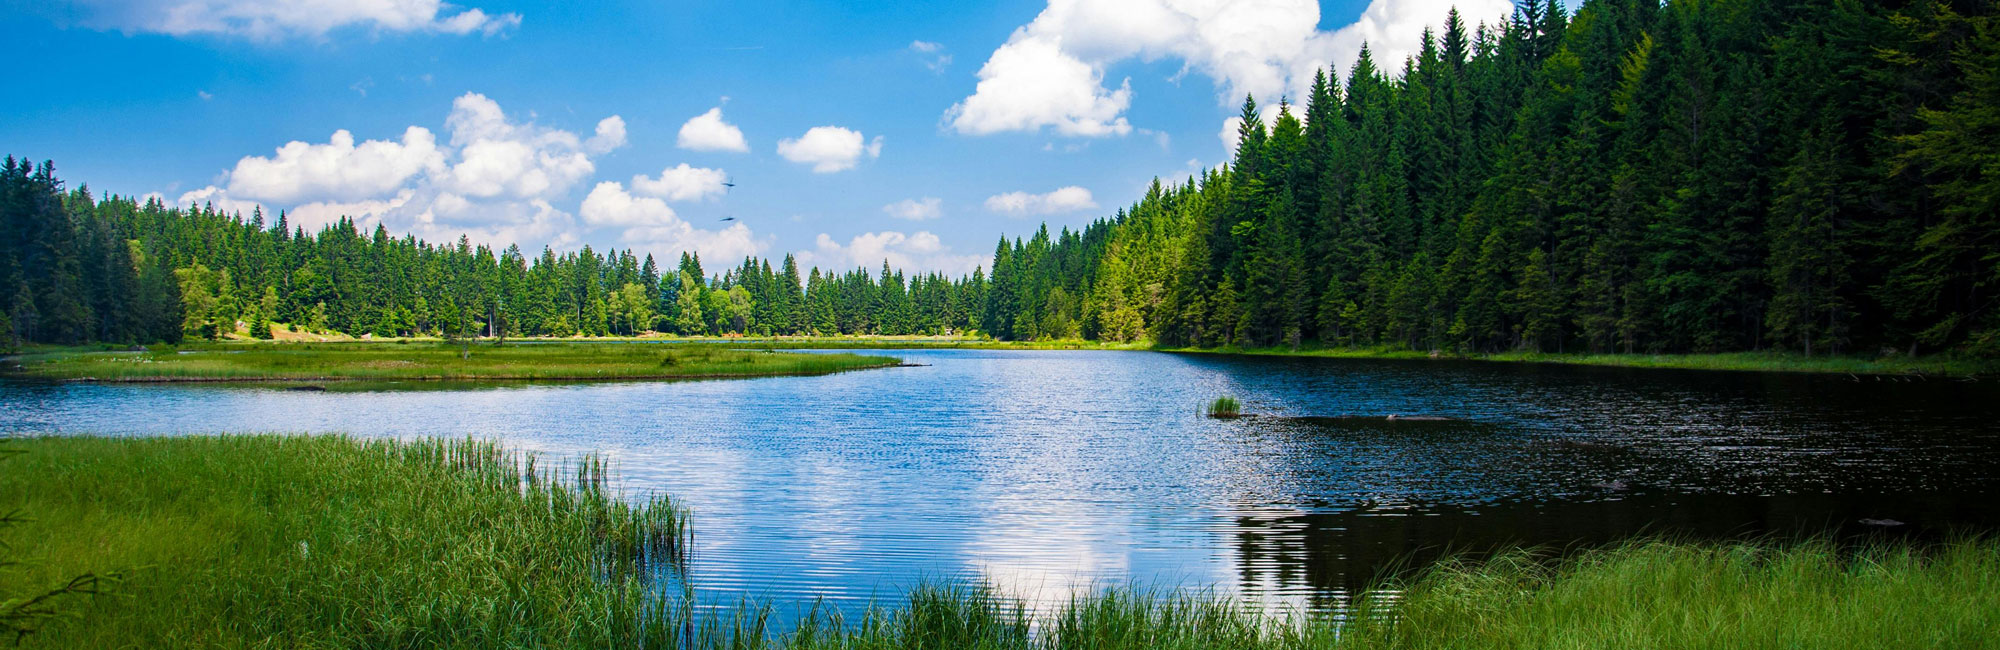 A bright blue lake with coniferous trees all around it